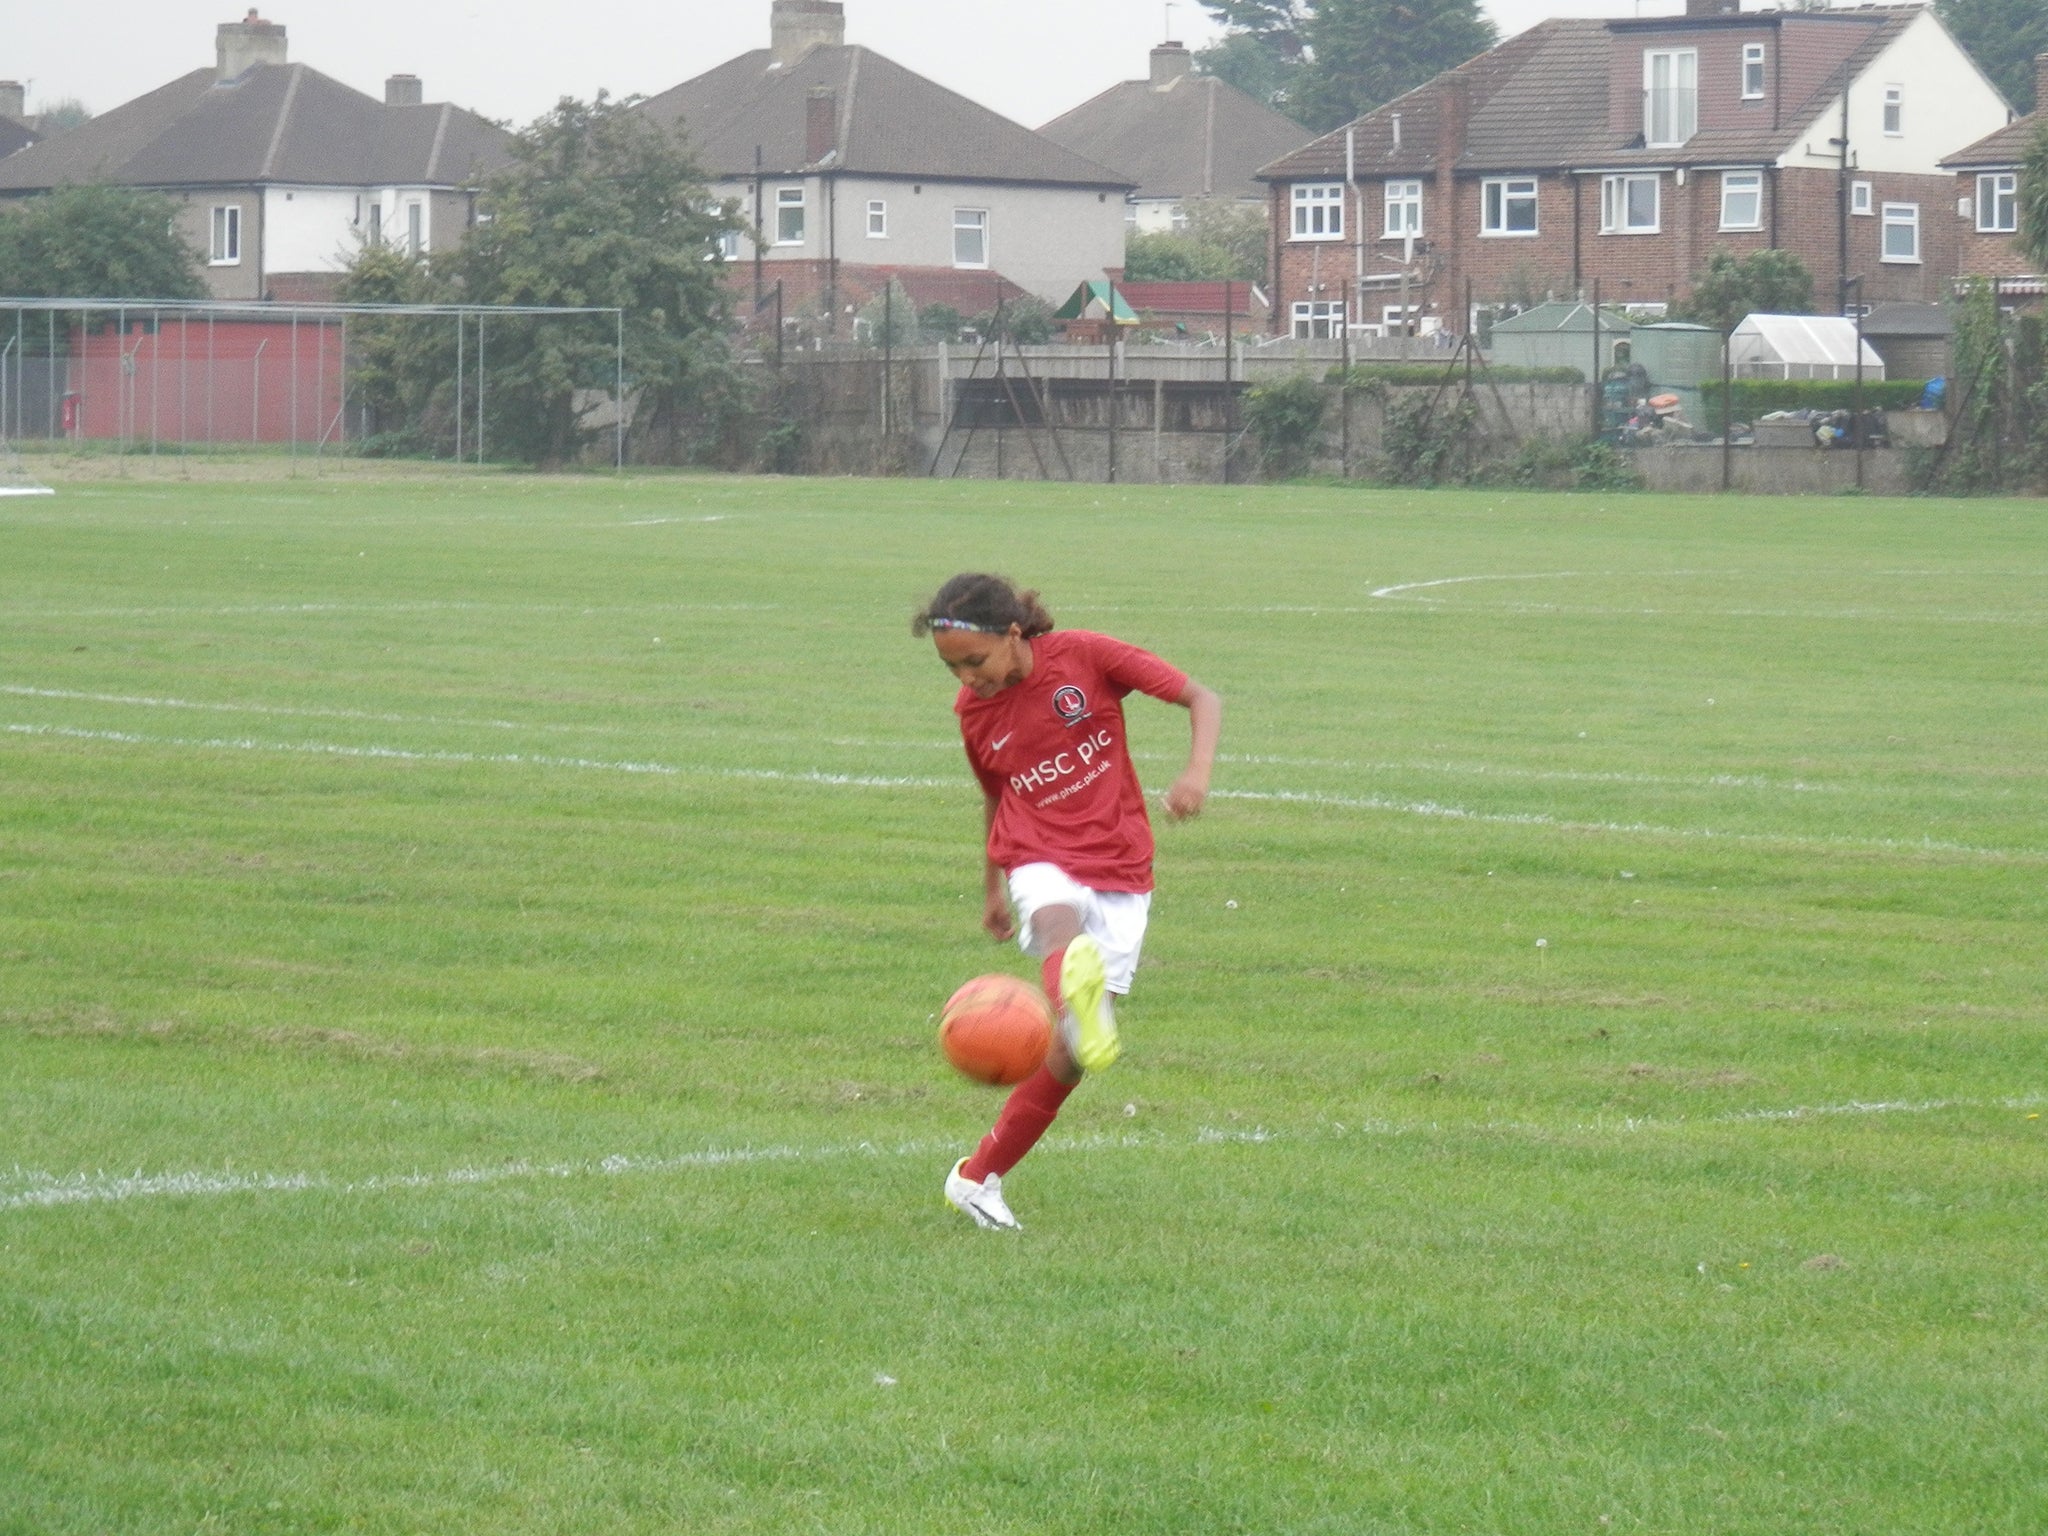 She shoots, she scores: Paul's daughter Esme on the pitch